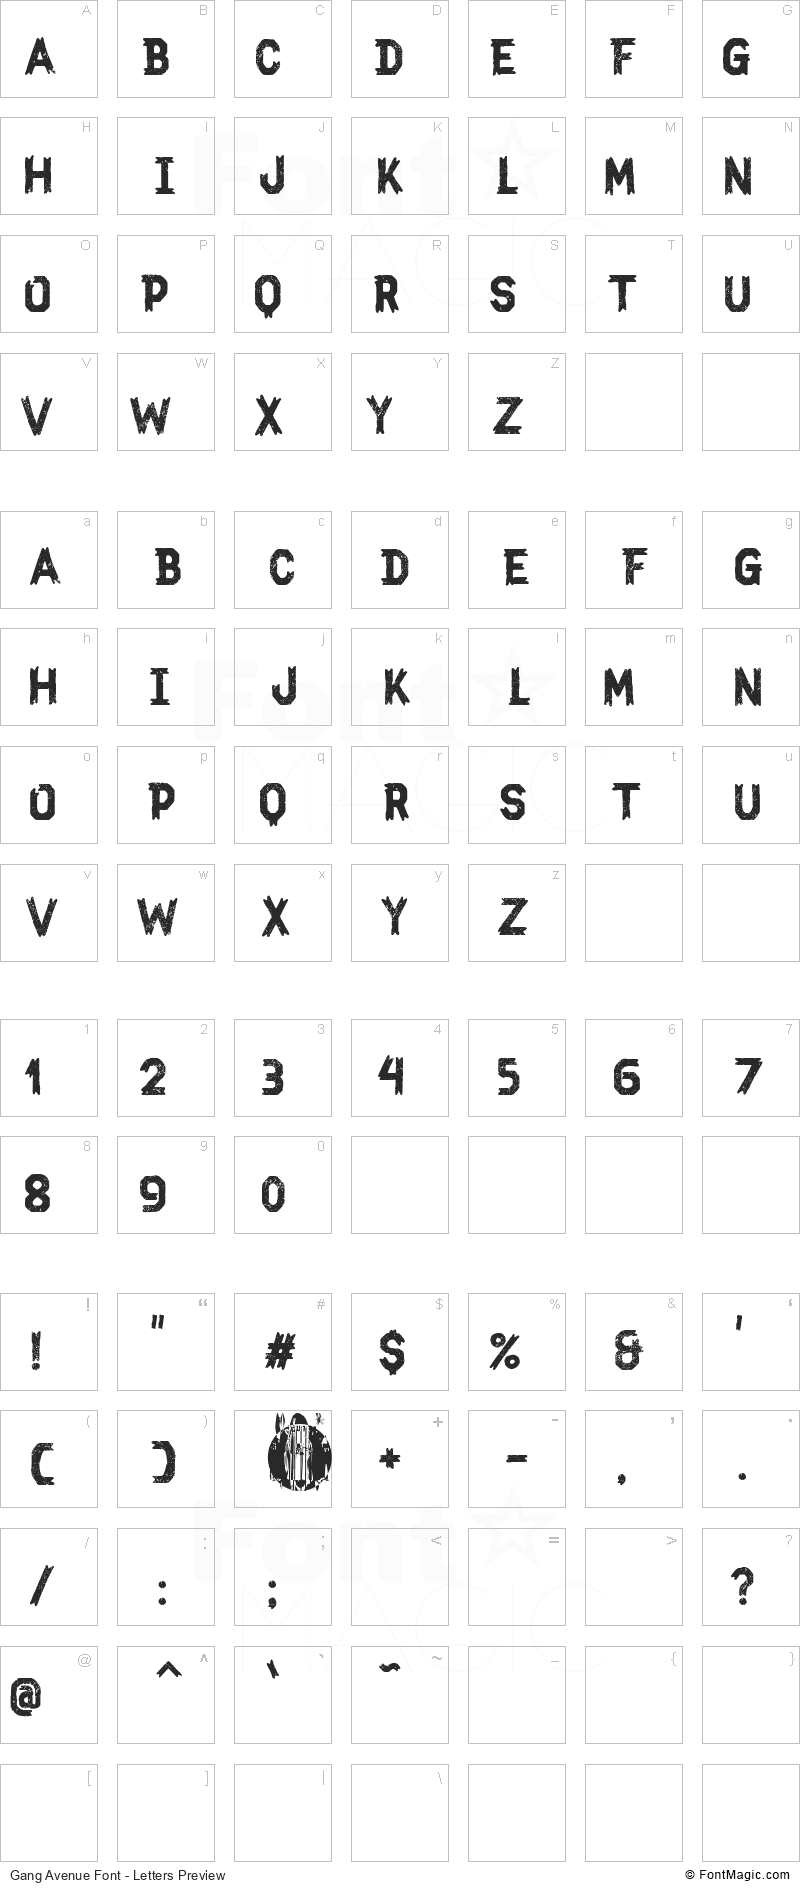 Gang Avenue Font - All Latters Preview Chart